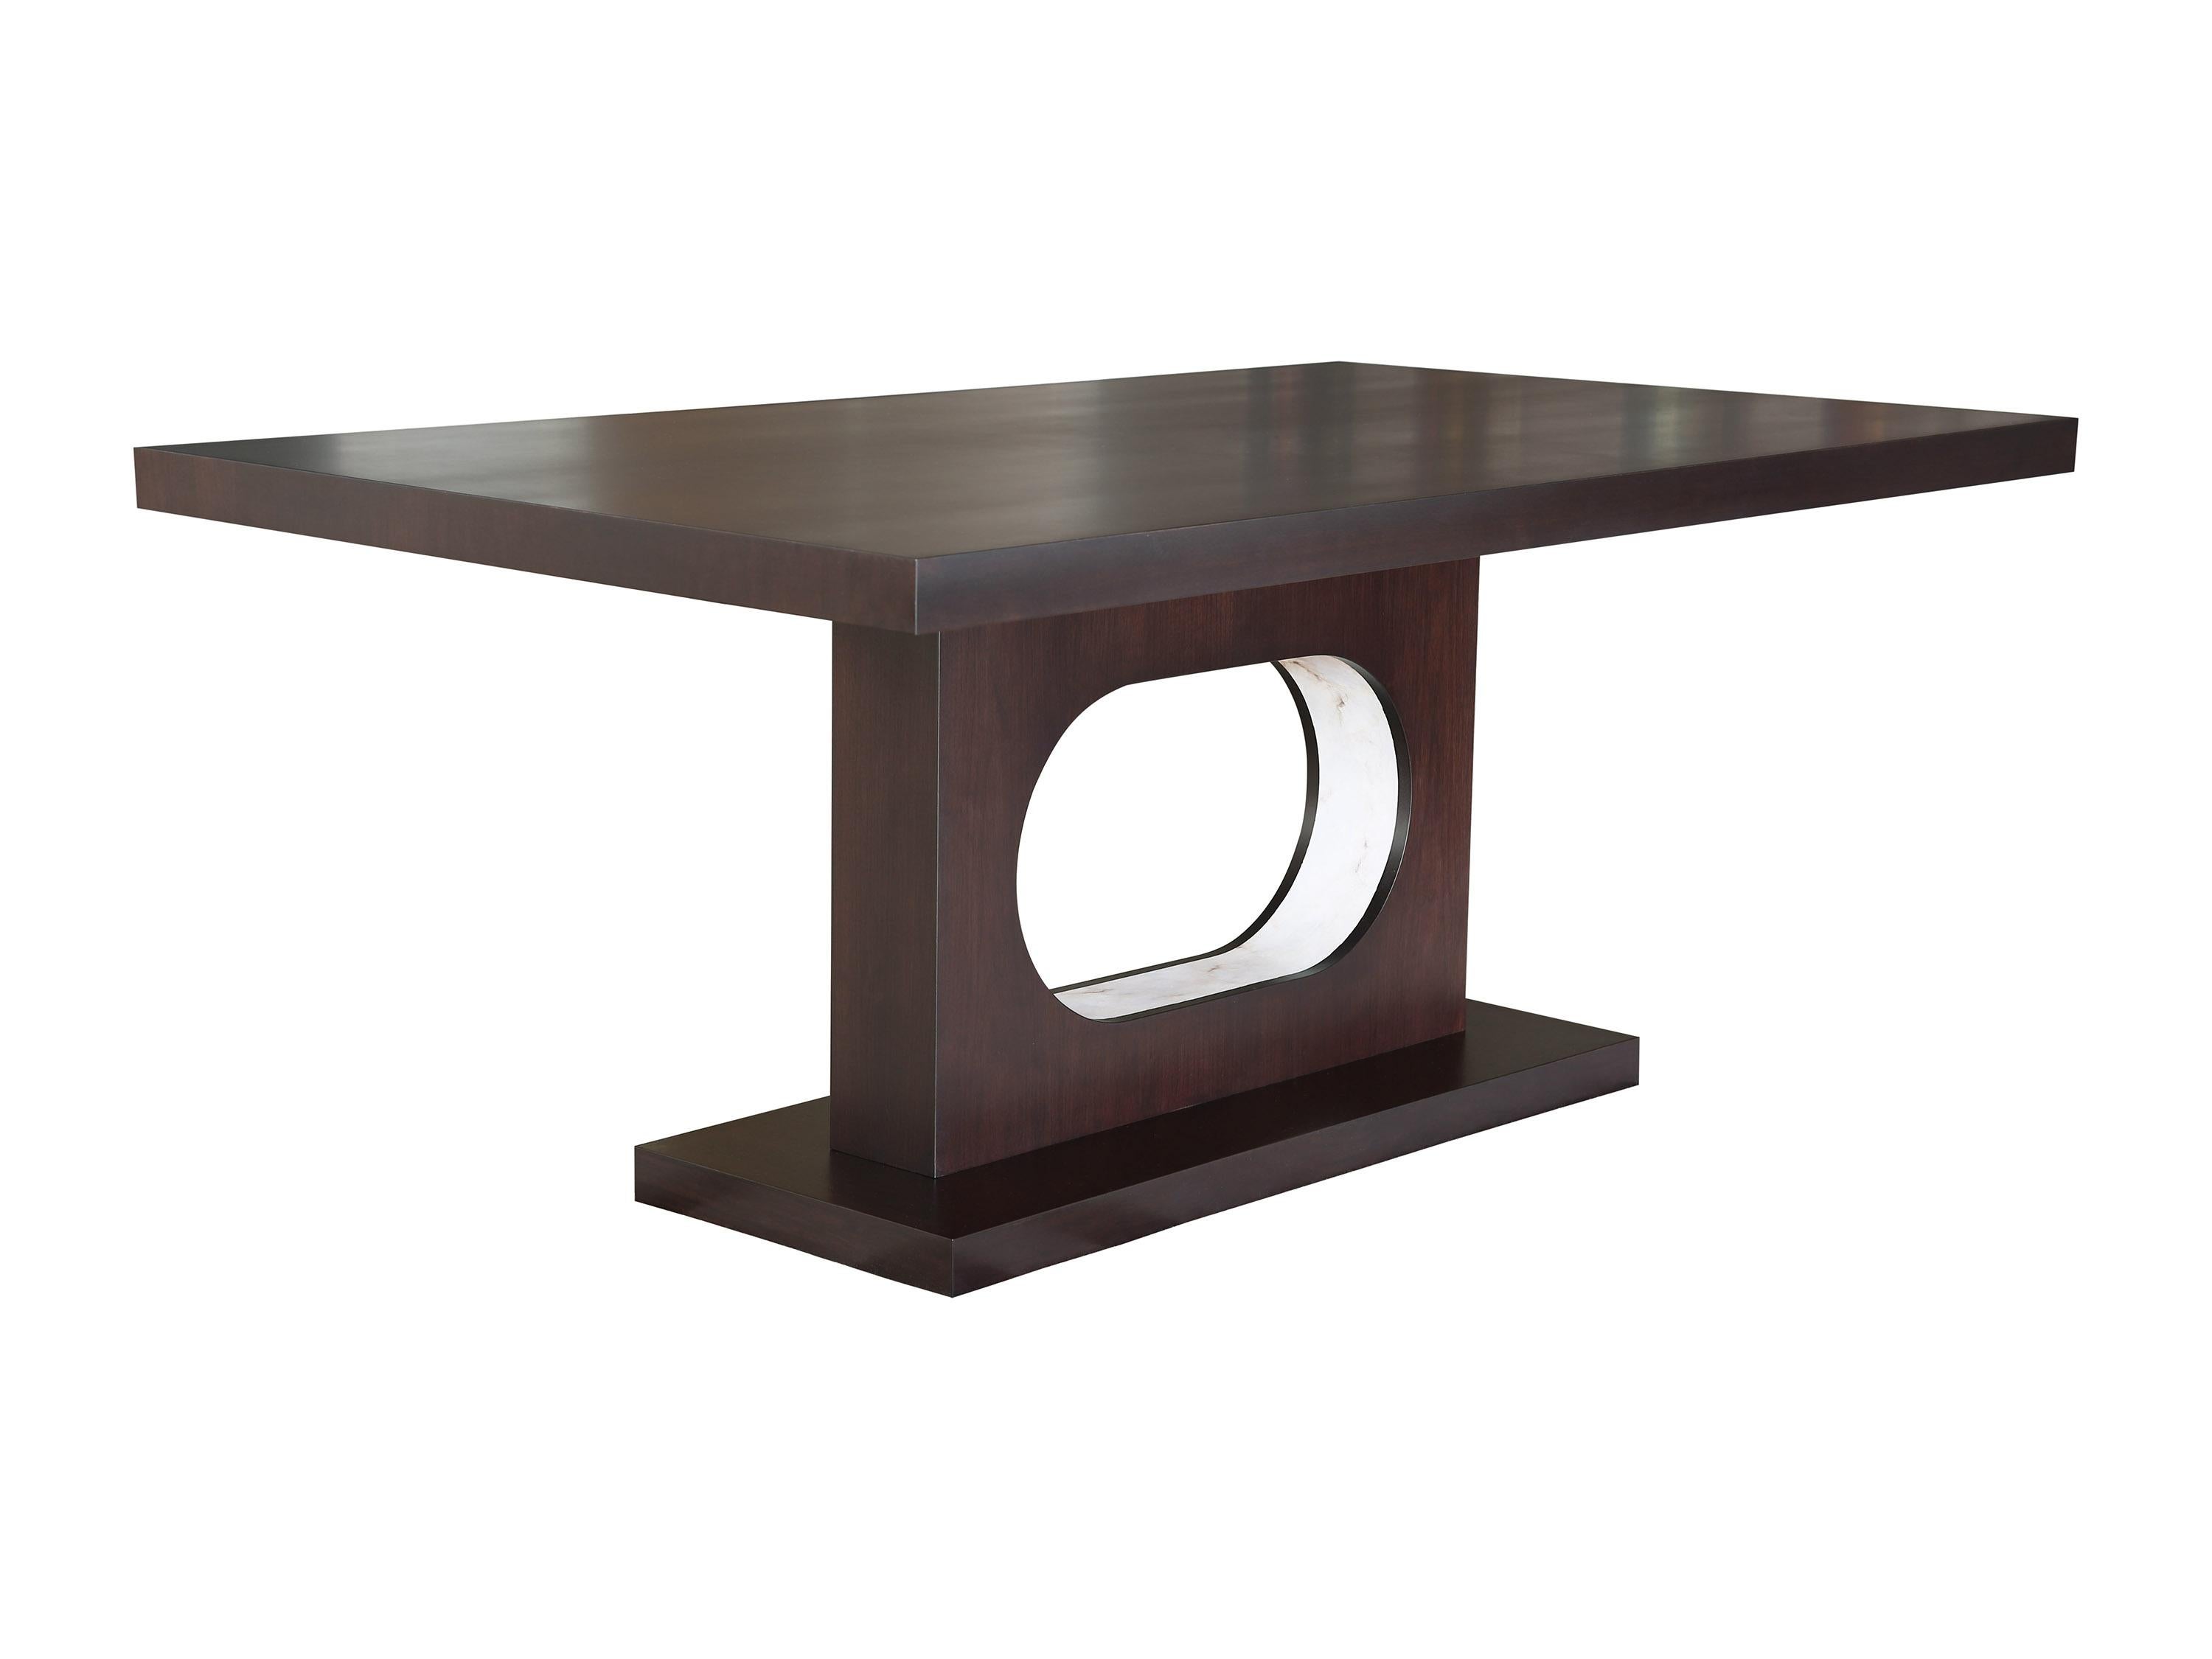 Lisa Tharp Collection  Library Table 

Strong, elegant lines host fine dining or quiet study. At home in traditional and modern settings alike. 

Fine-grain walnut veneer over green (formaldehyde-free) MDF
Walnut stain with clear coat